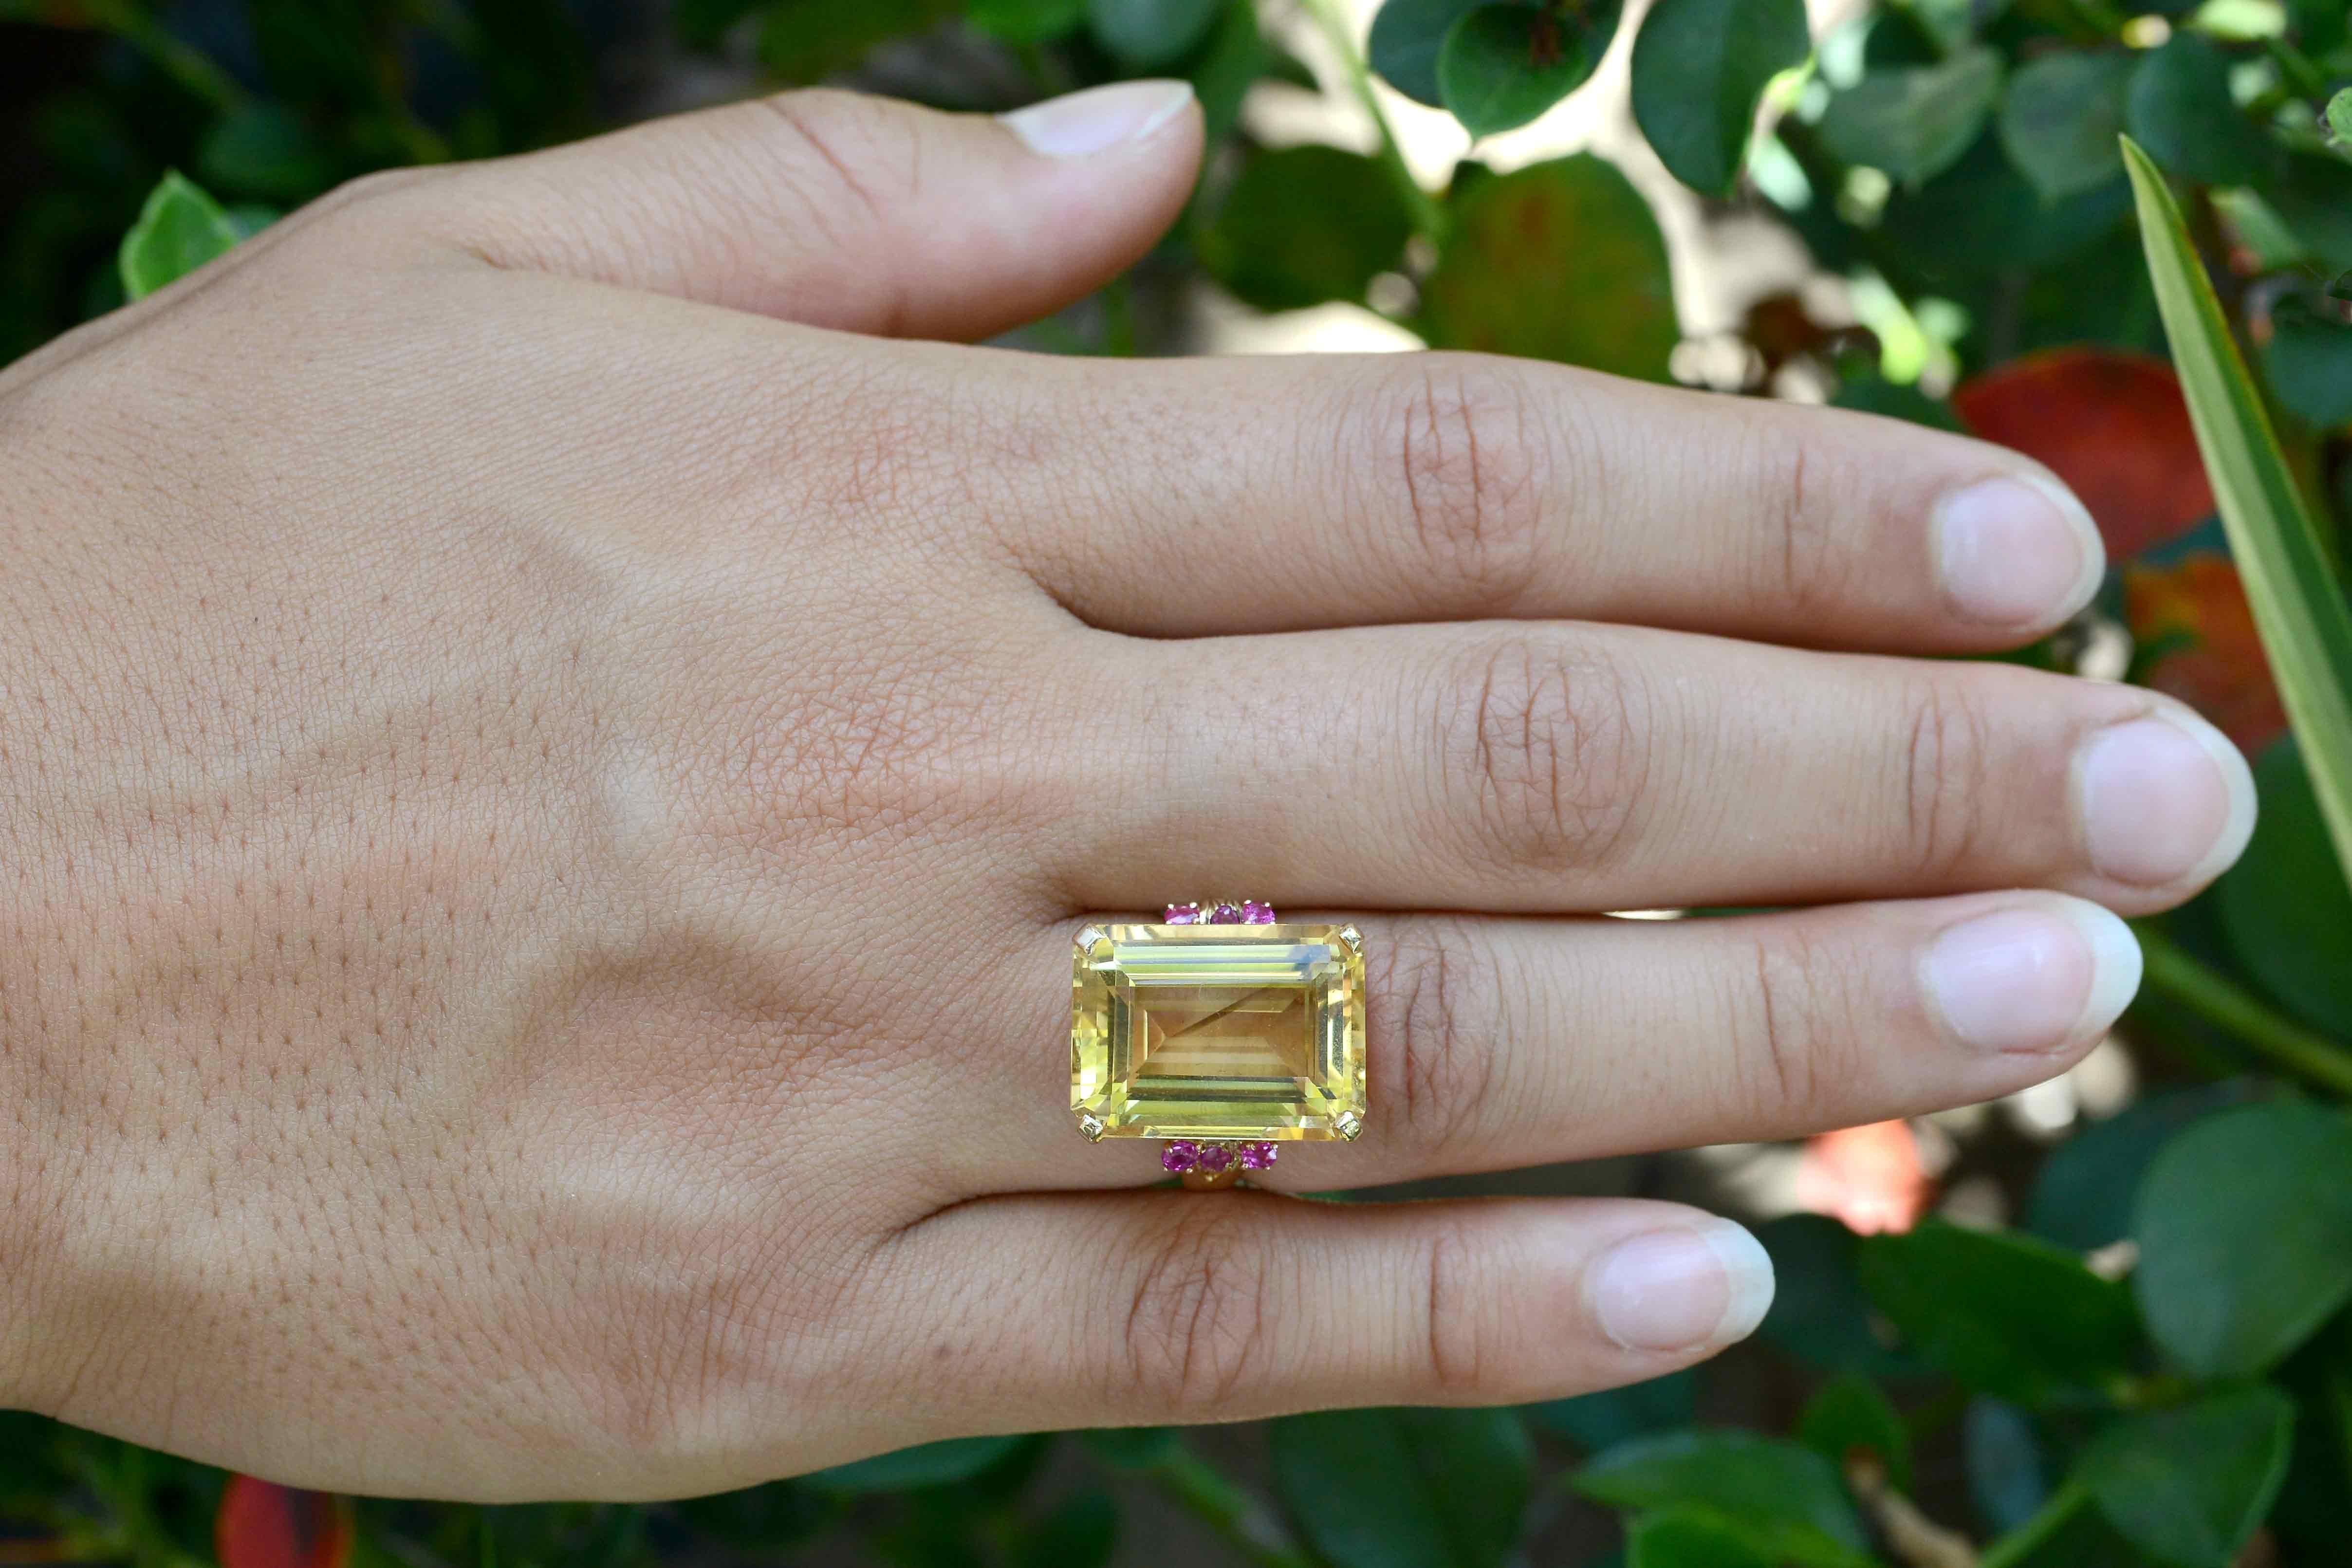 This 16.50 carat 1940's era retro citrine and ruby cocktail ring is a beautiful example of mid century jewelry. The huge, emerald cut gemstone sits in a 14K yellow gold cradle with 3 wonderful bright rubies on each shoulder that really compliment